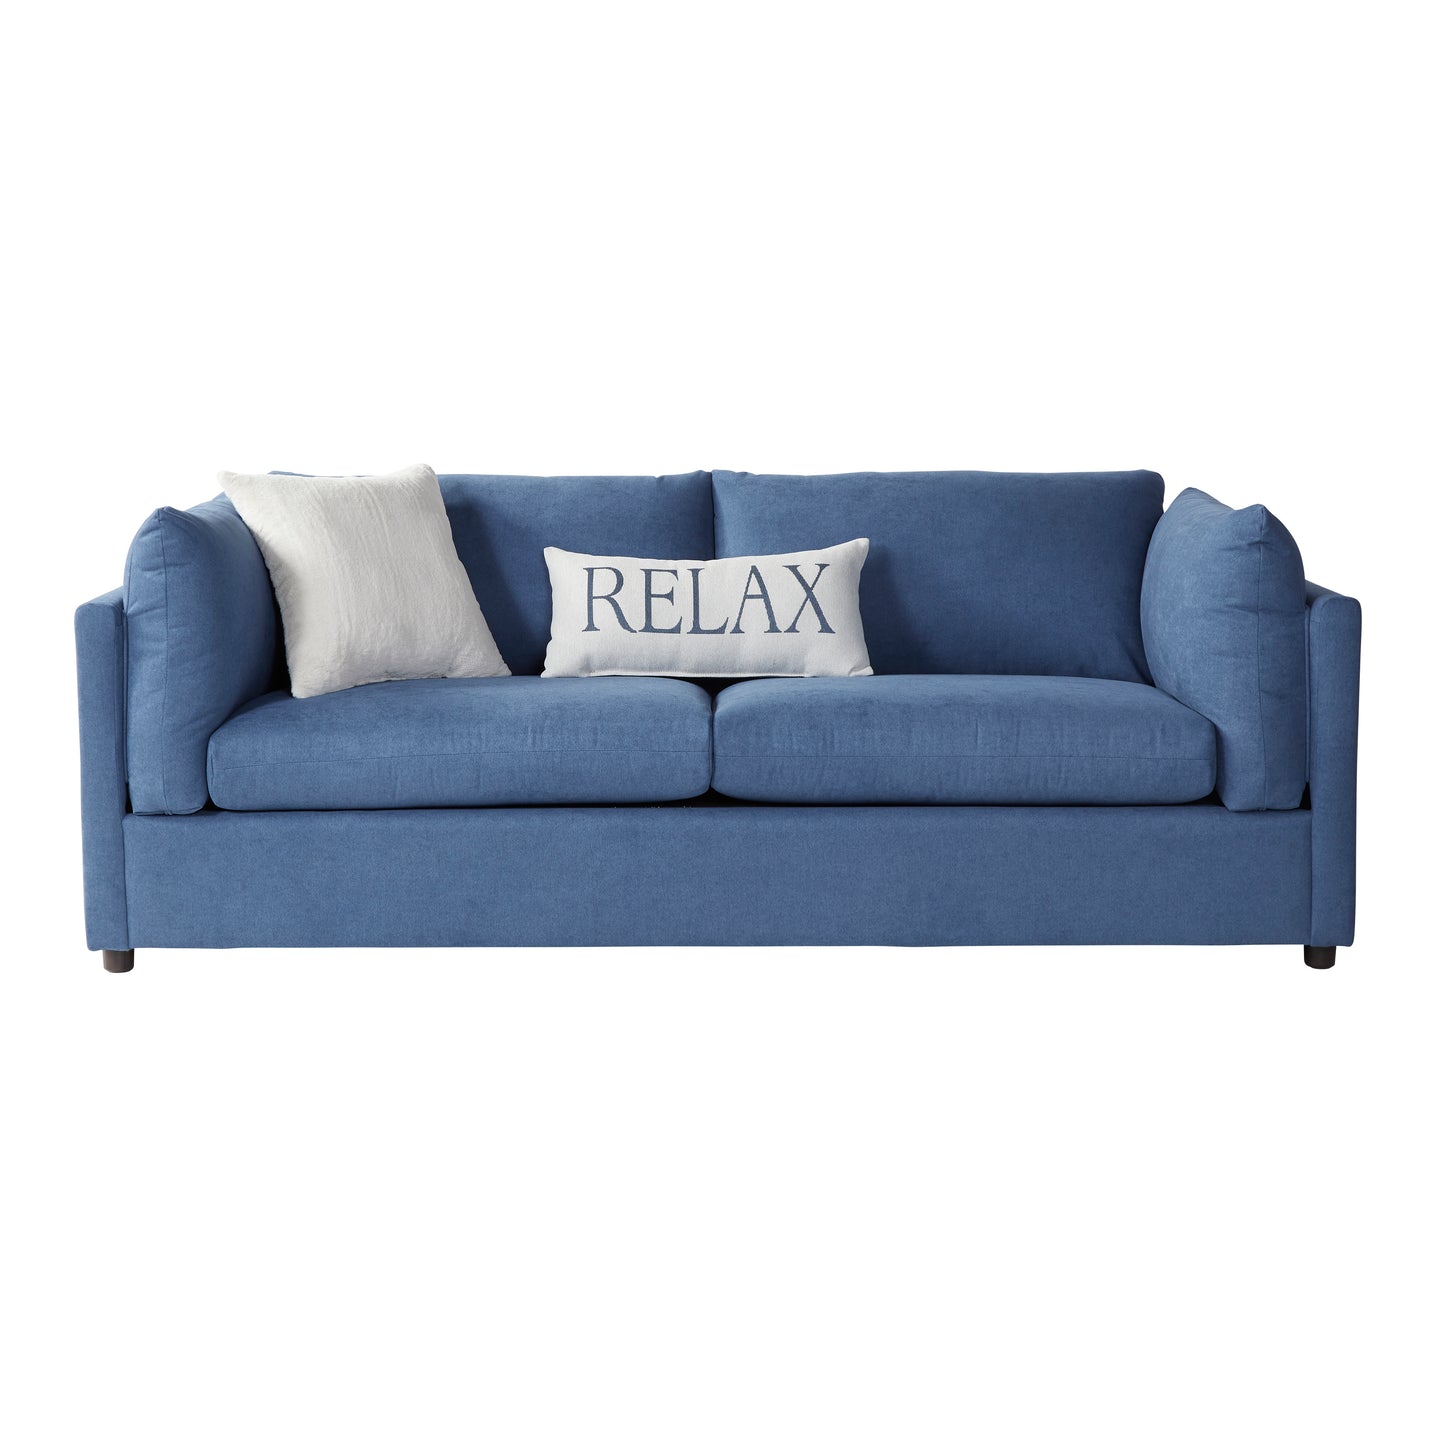 Roundhill Furniture Enda Pillow Back Fabric Sofa and Cuddler Chair Living Room Collection, Image Navy